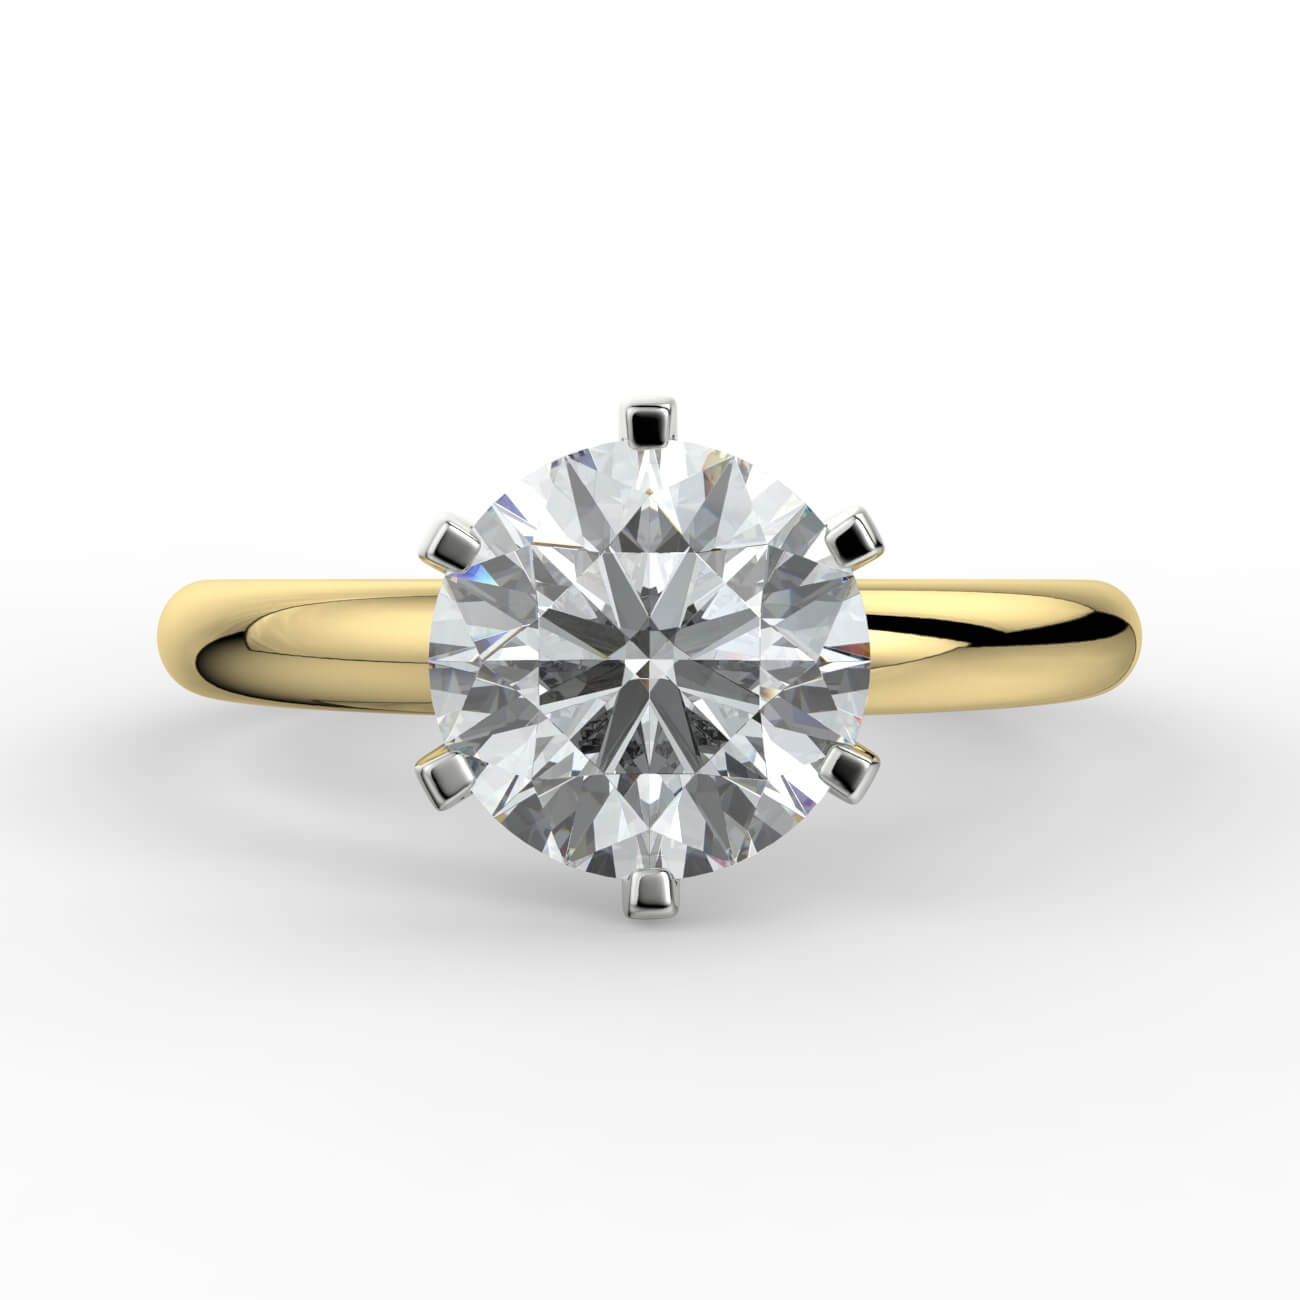 Comfort fit 6 claw solitaire diamond ring in white and yellow gold – Australian Diamond Network